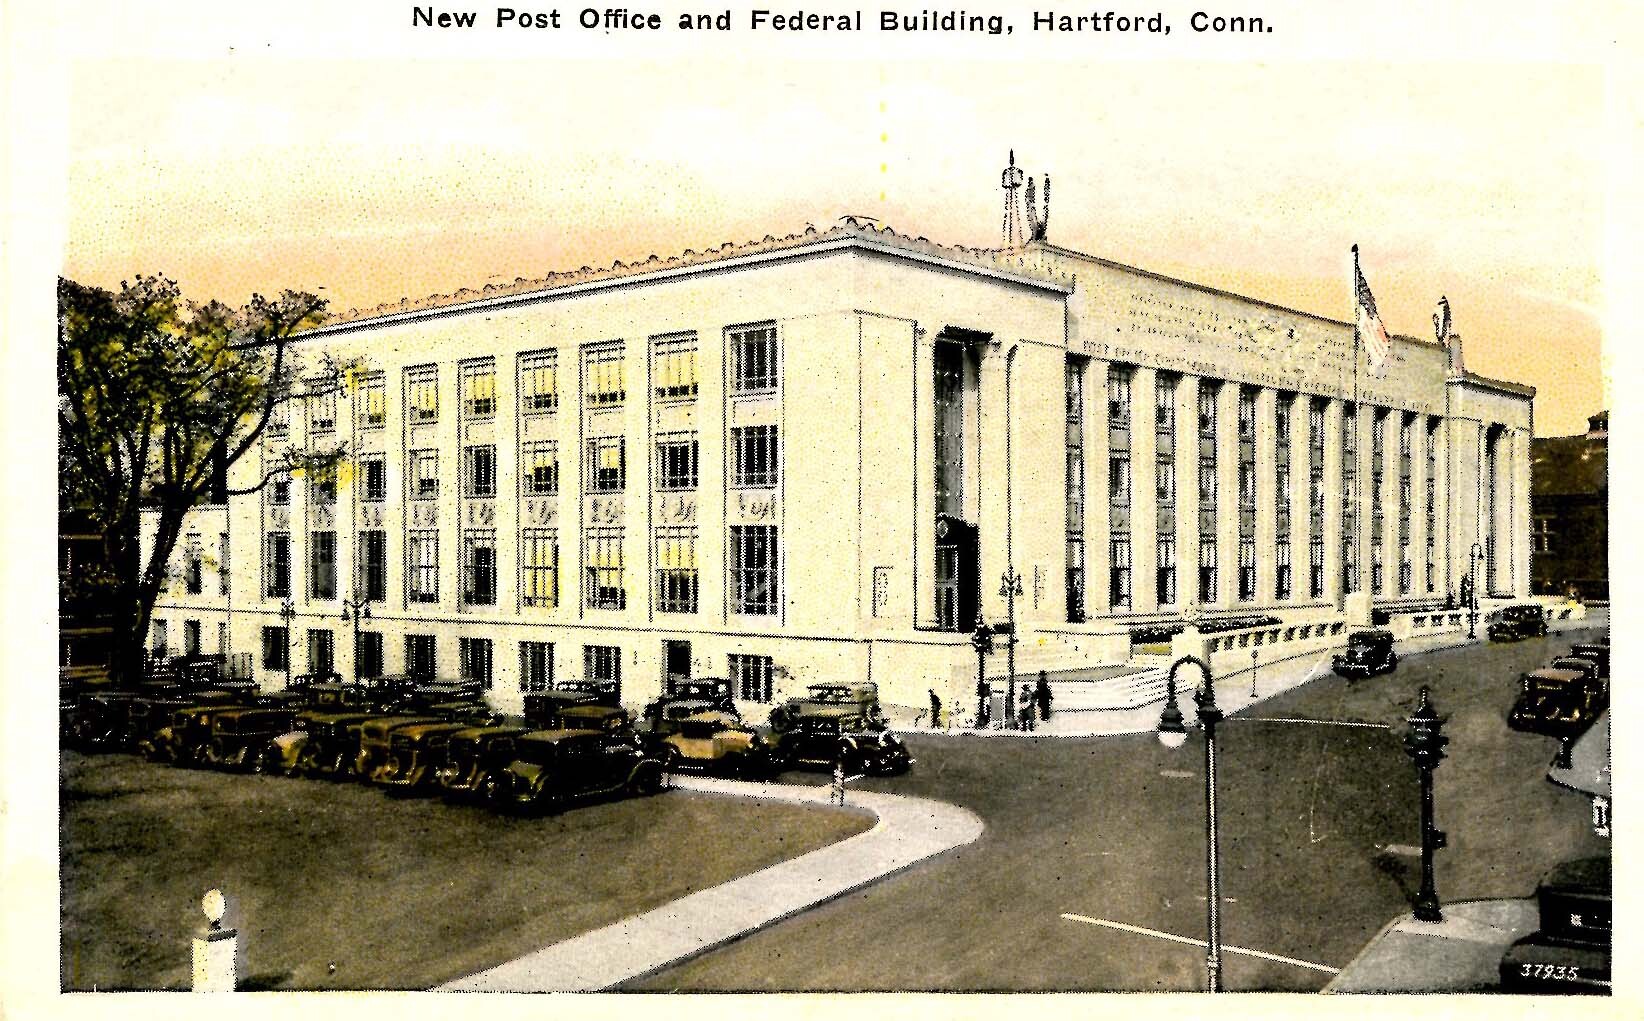 CT - Hartford. New Post Office & Federal Building, 1933 | United States -  Connecticut - Hartford, Postcard / HipPostcard